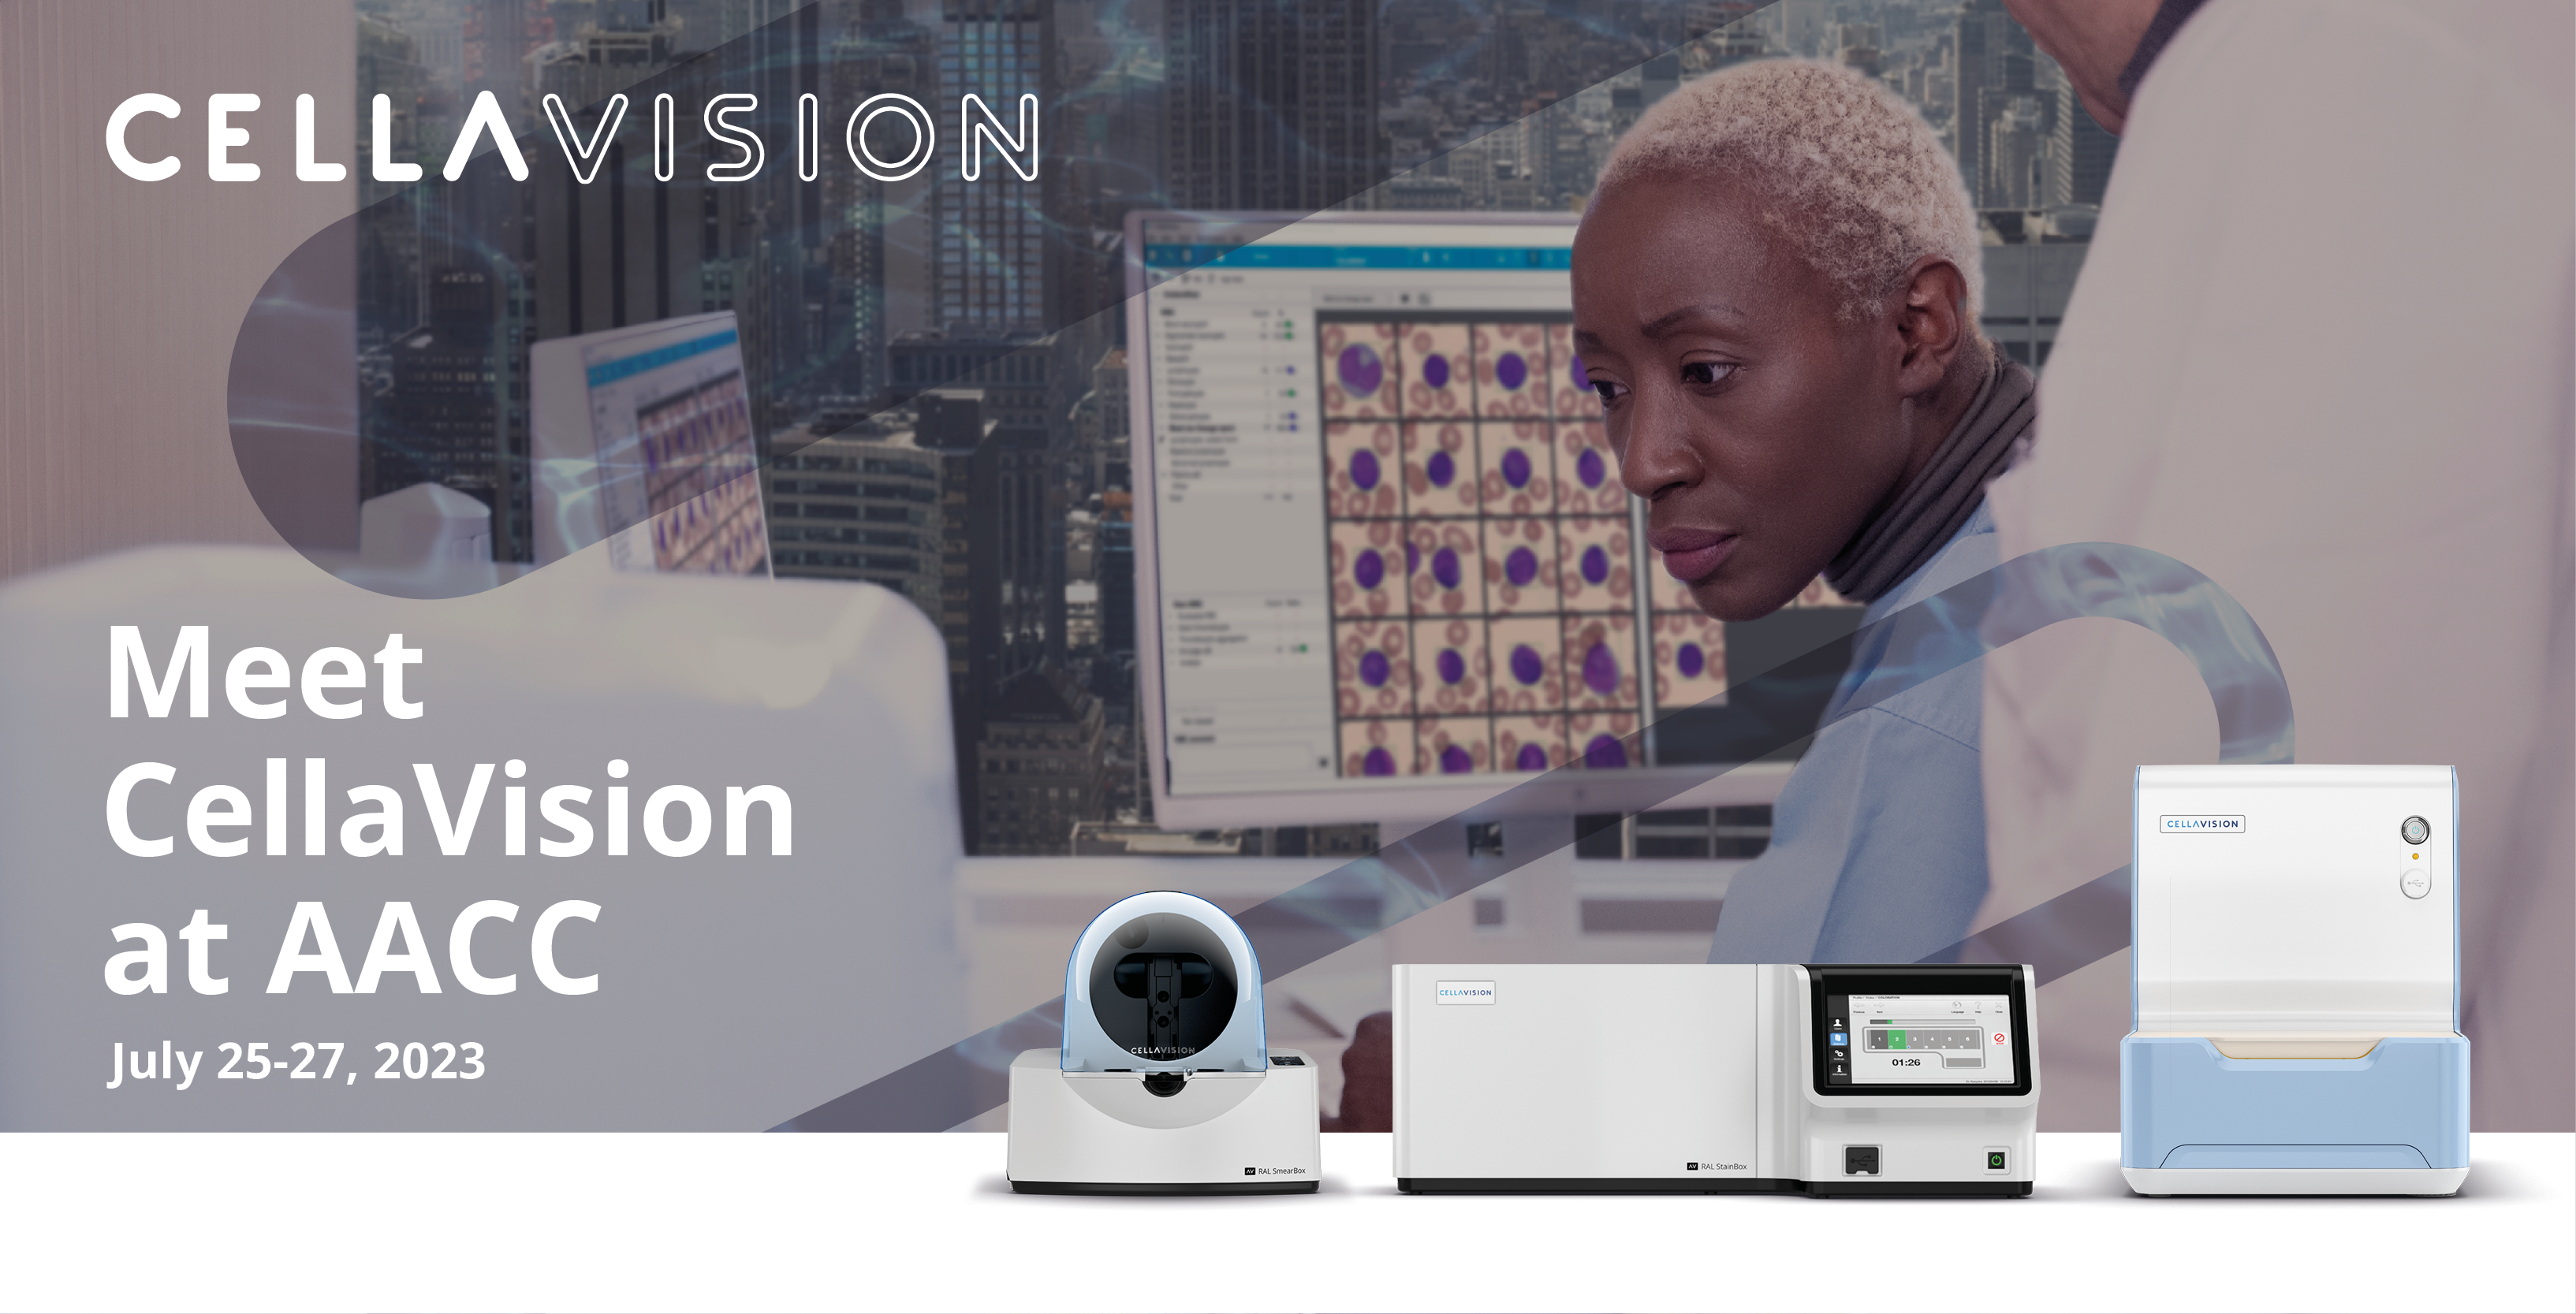 Meet CellaVision at AACC 2023